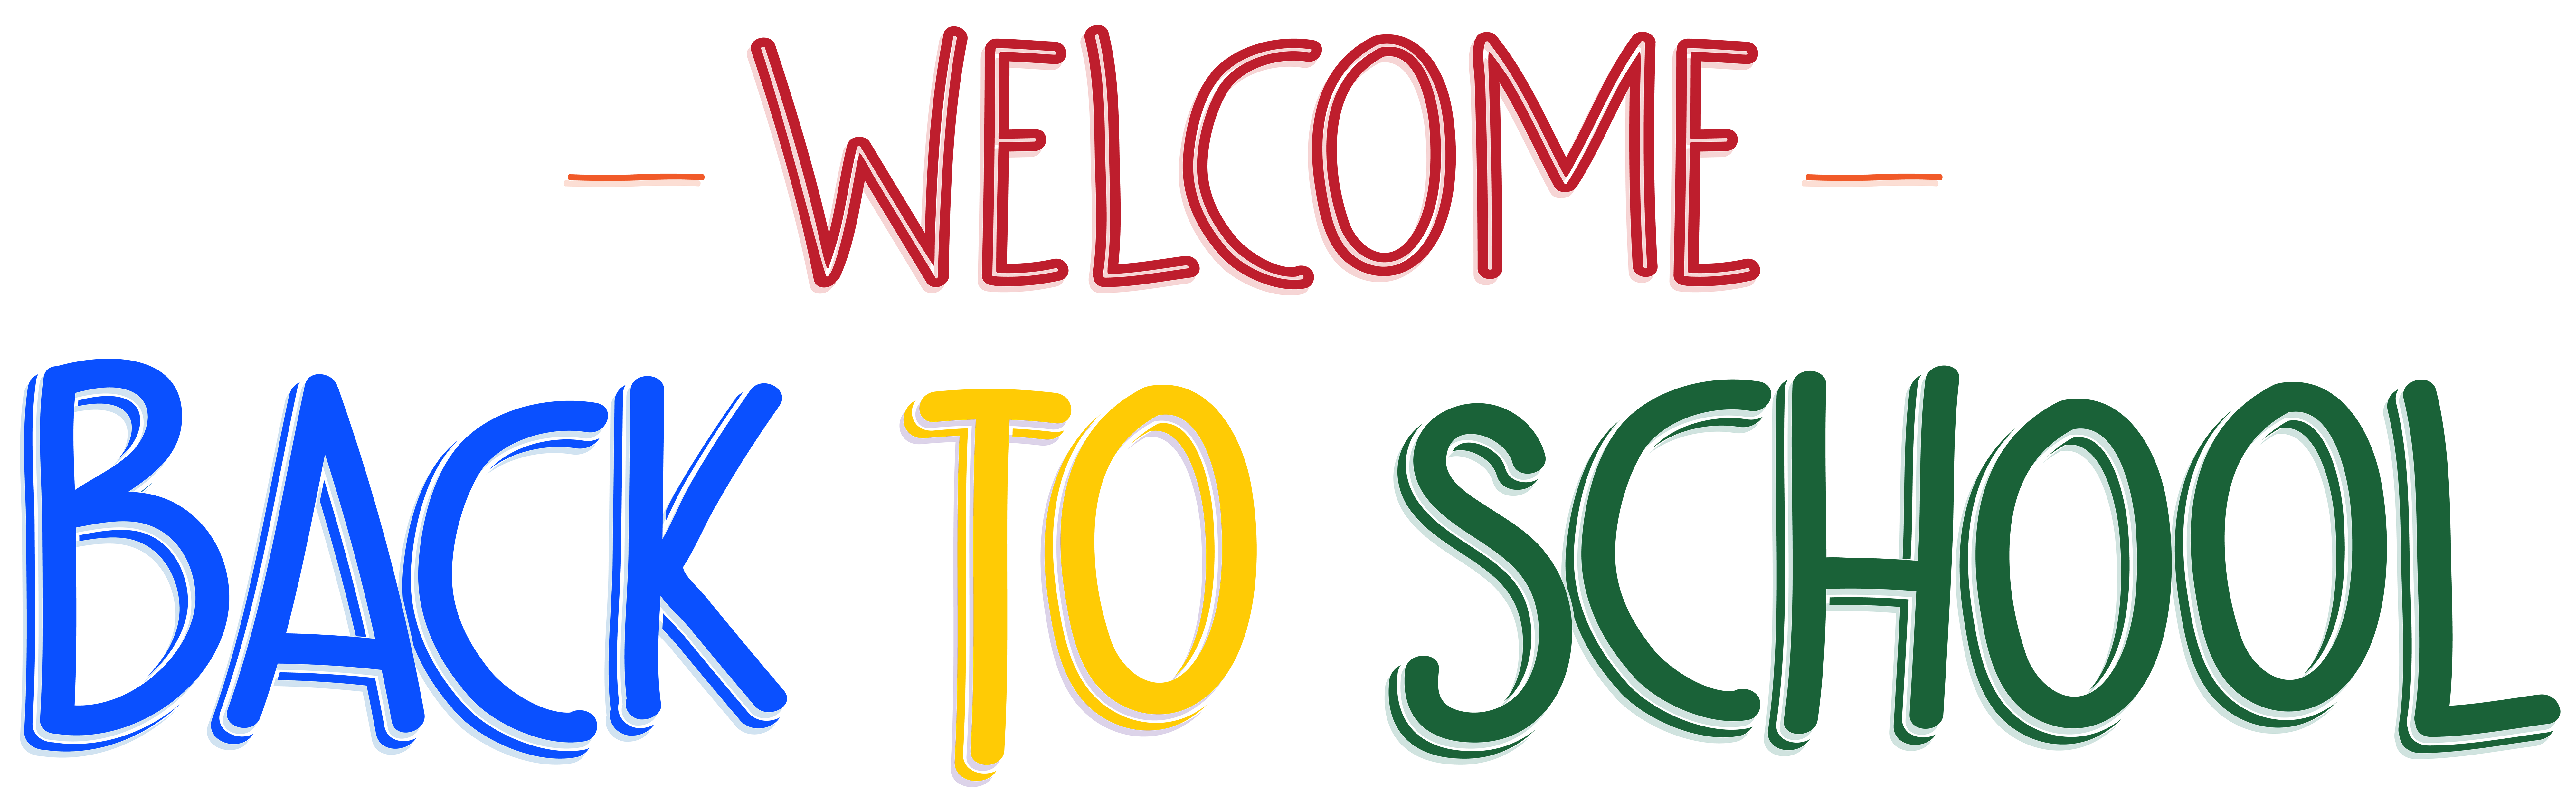 Free Clip Art Welcome Back. a